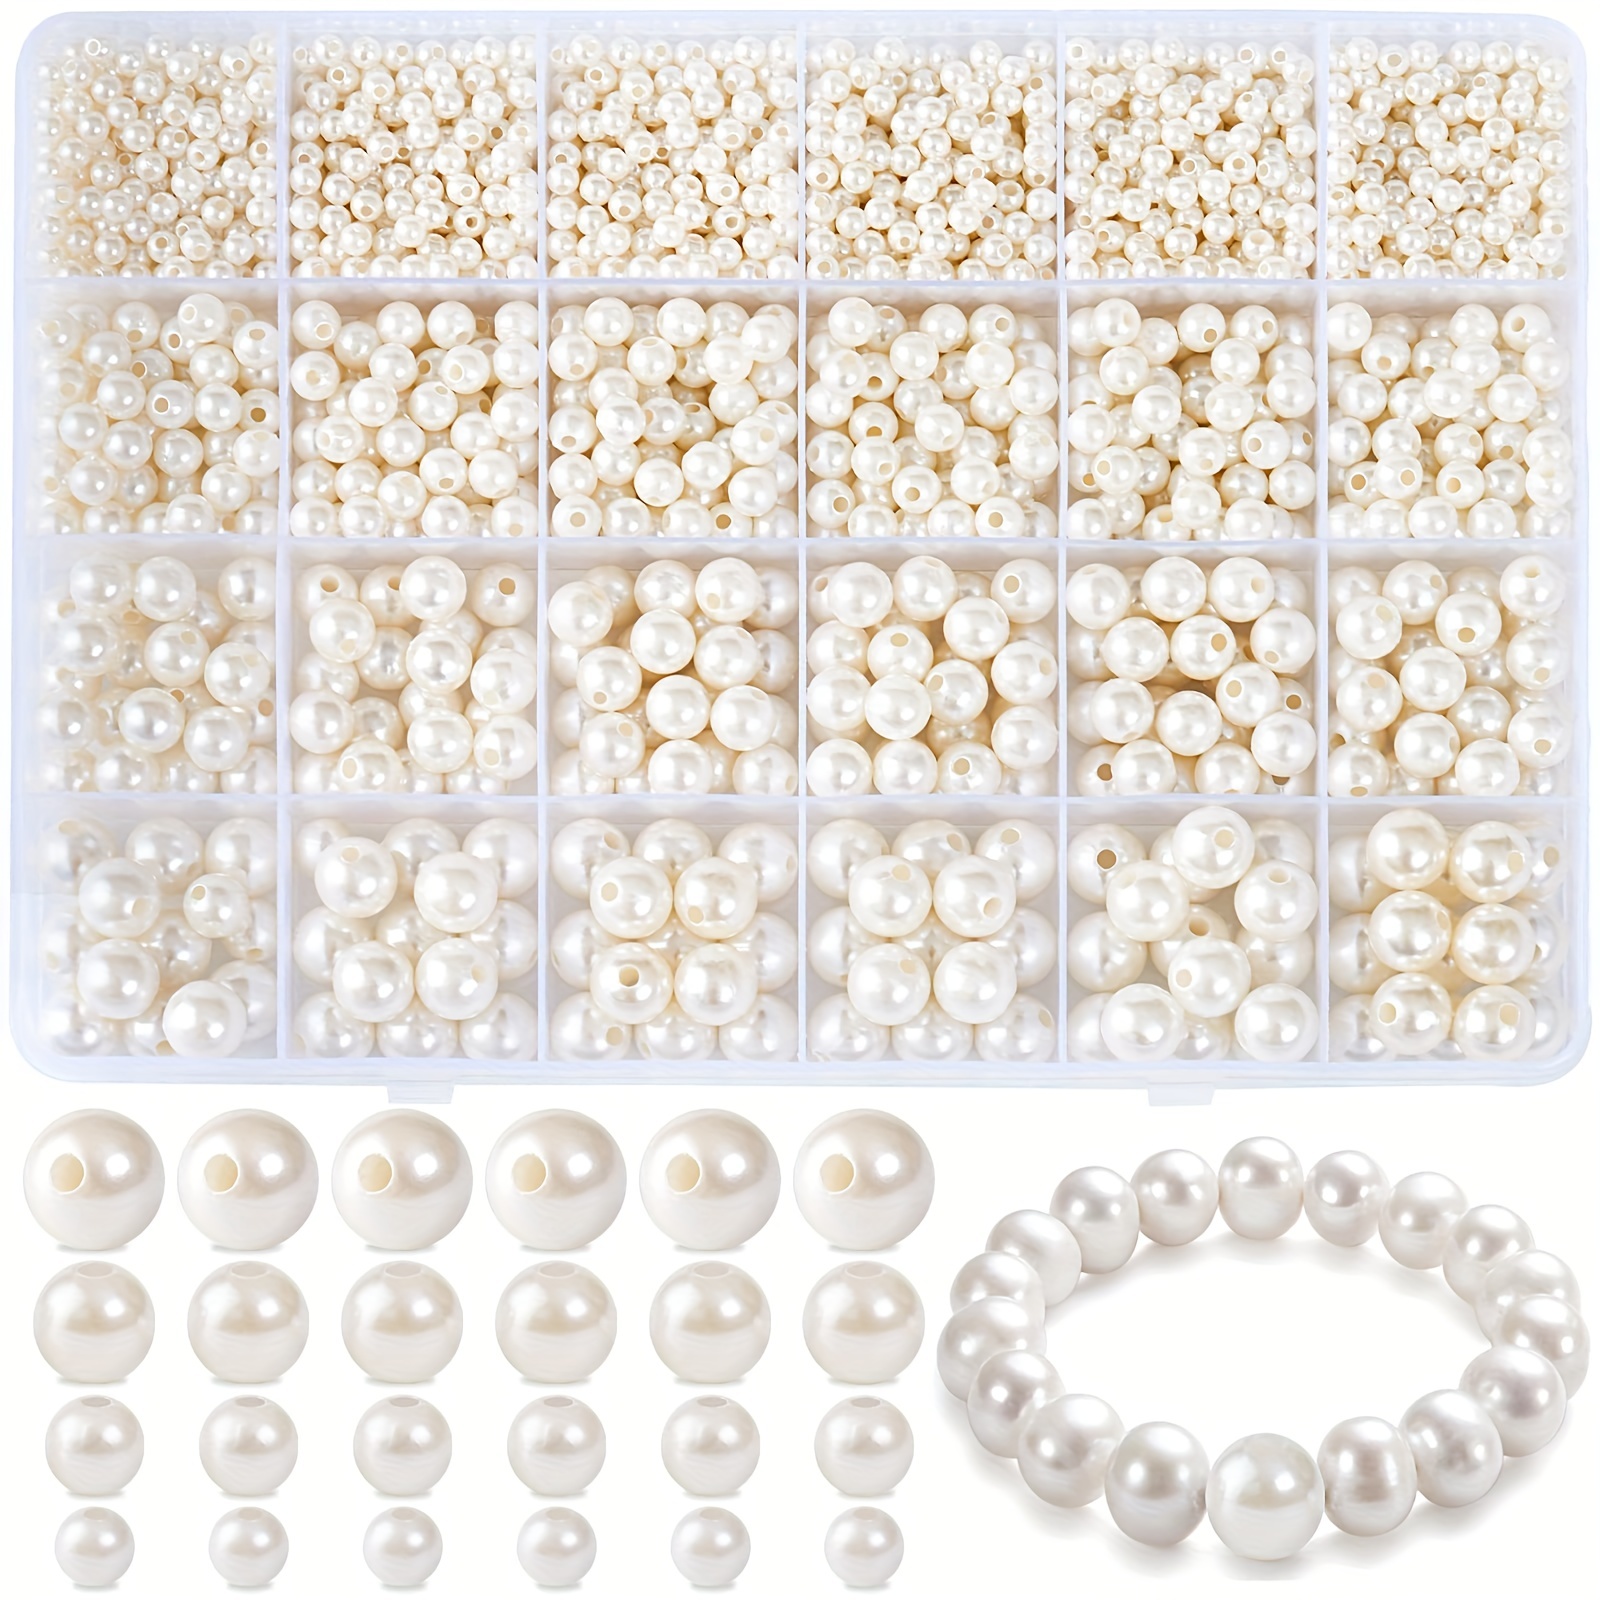 JADVY 940pcs Pearl Beads for Jewelry Making Kit, Beige Pearl Beads with  Accessories for Bracelets, Necklaces, Earrings and Crafts, DIY Pearls  Bracelet